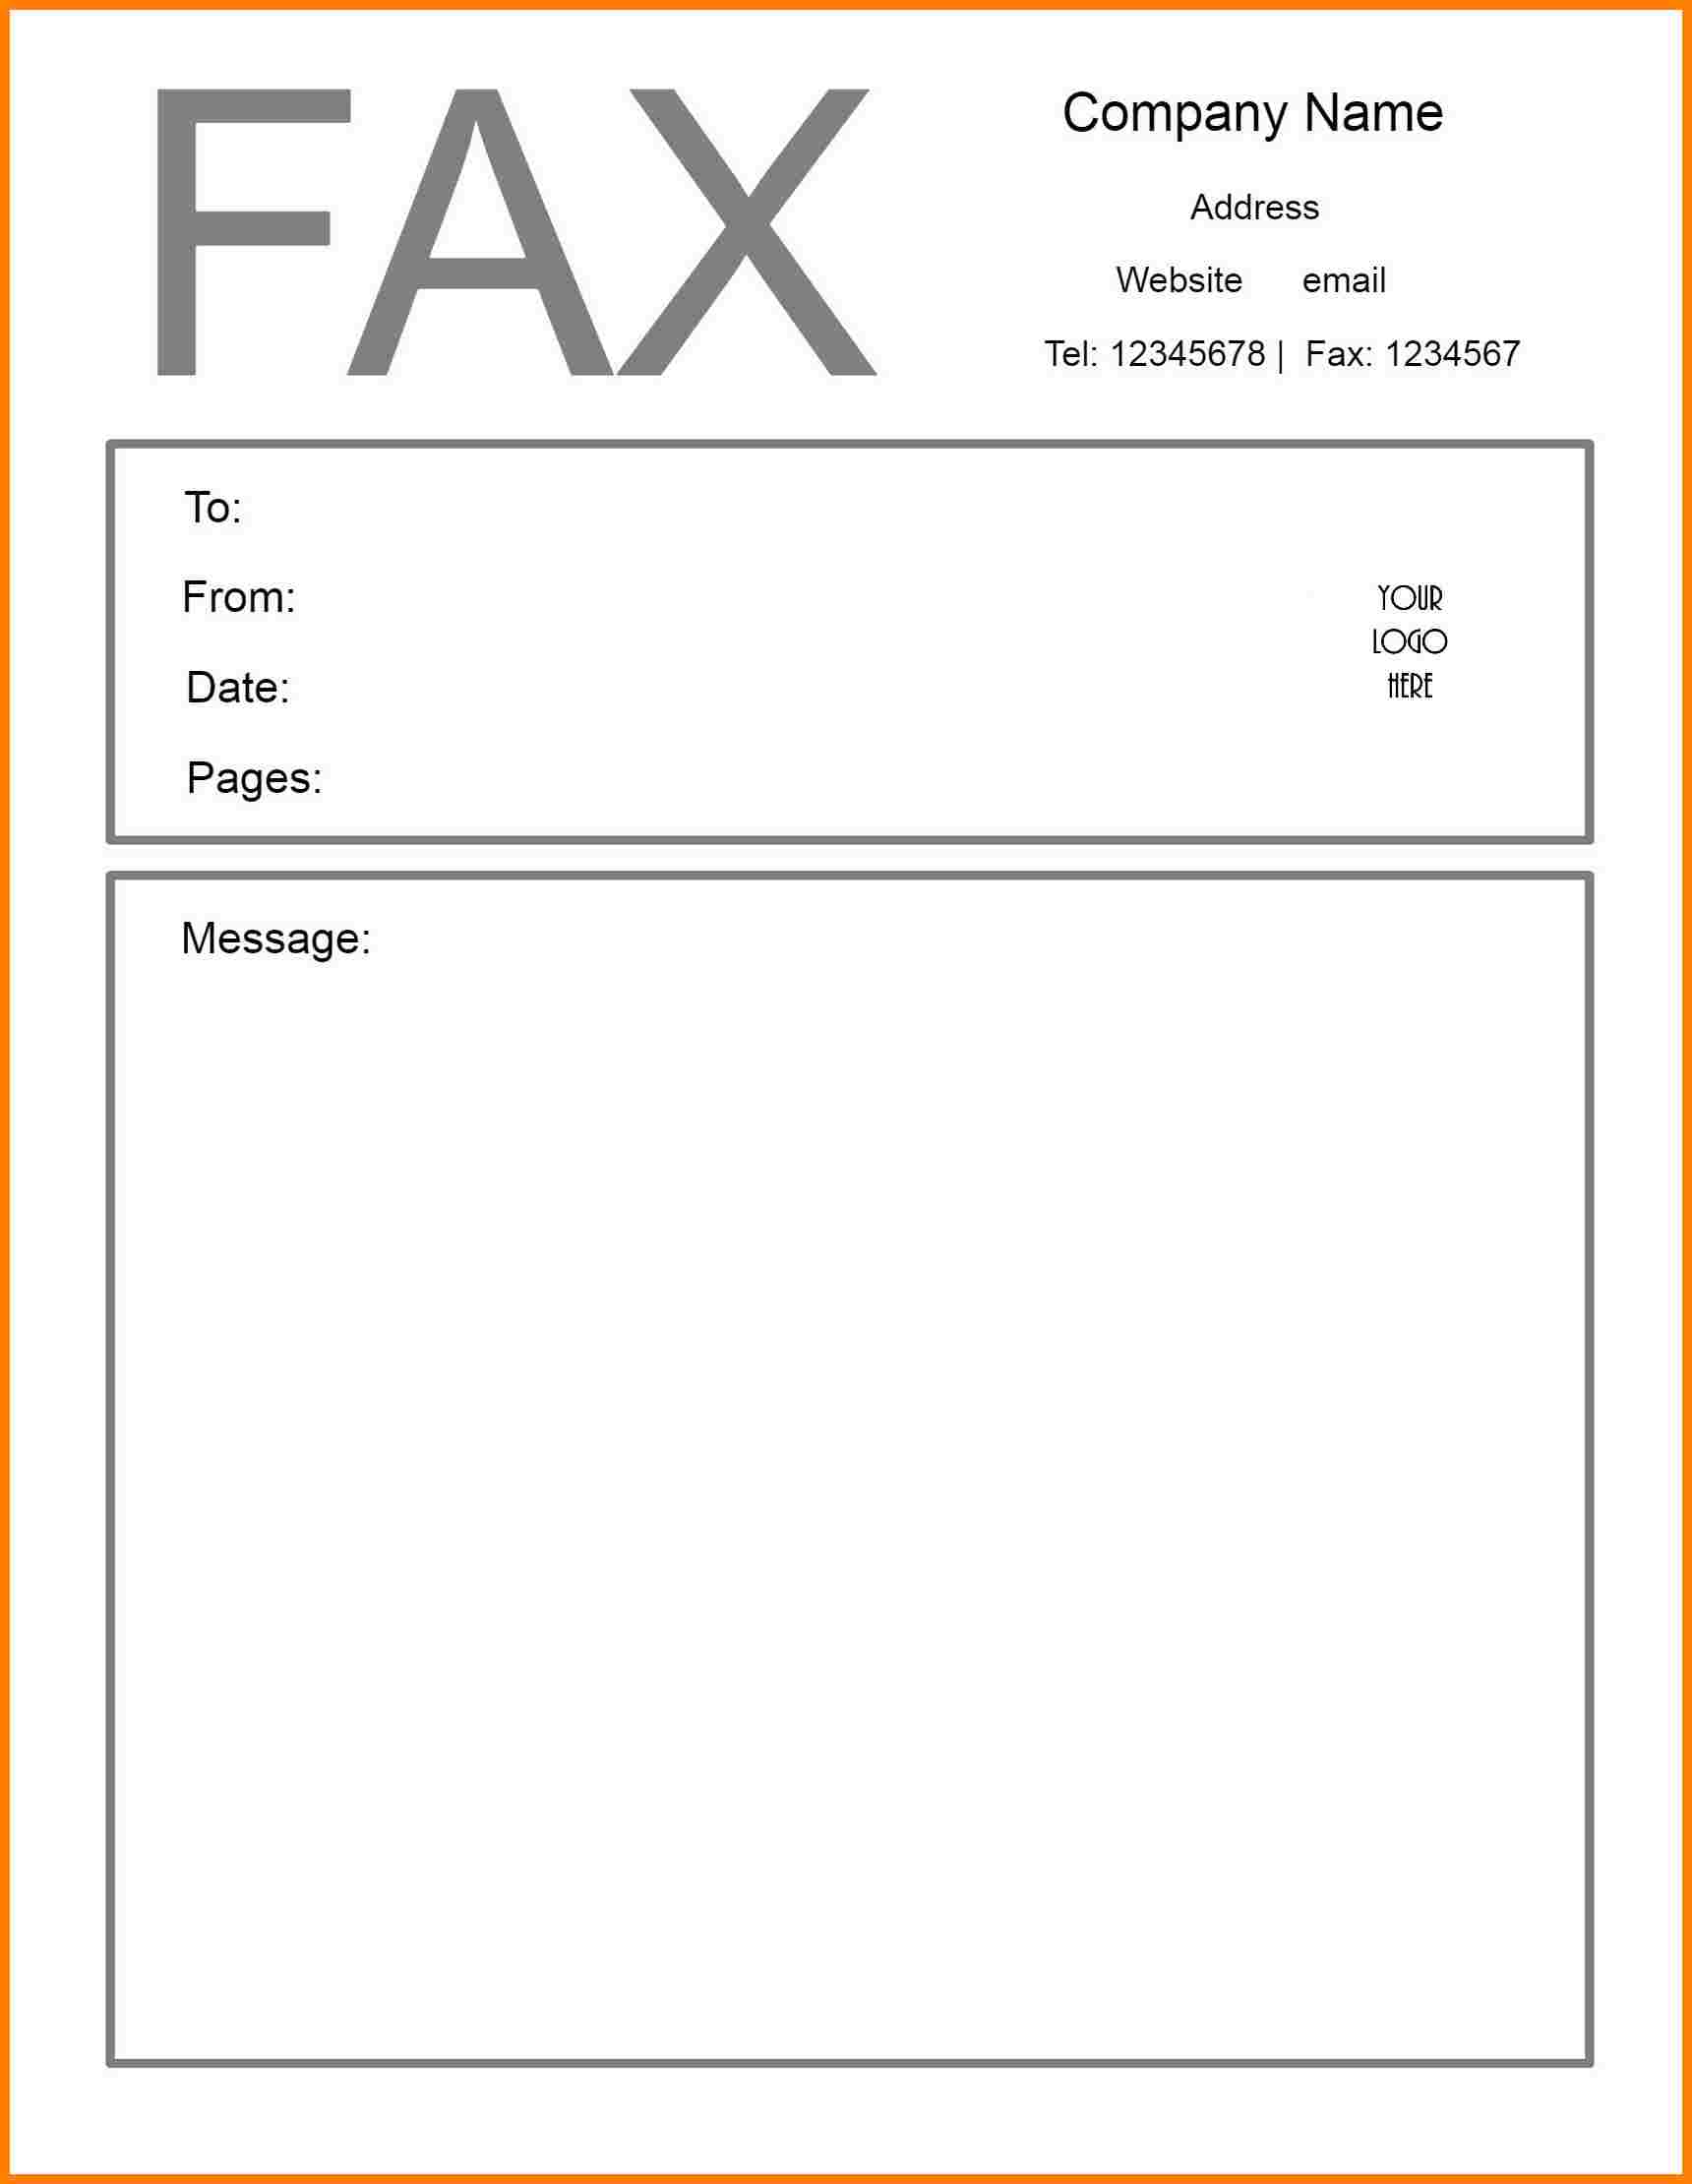 Fax Cover Sheet Download Free Fax Cover Sheet Professional Personal 